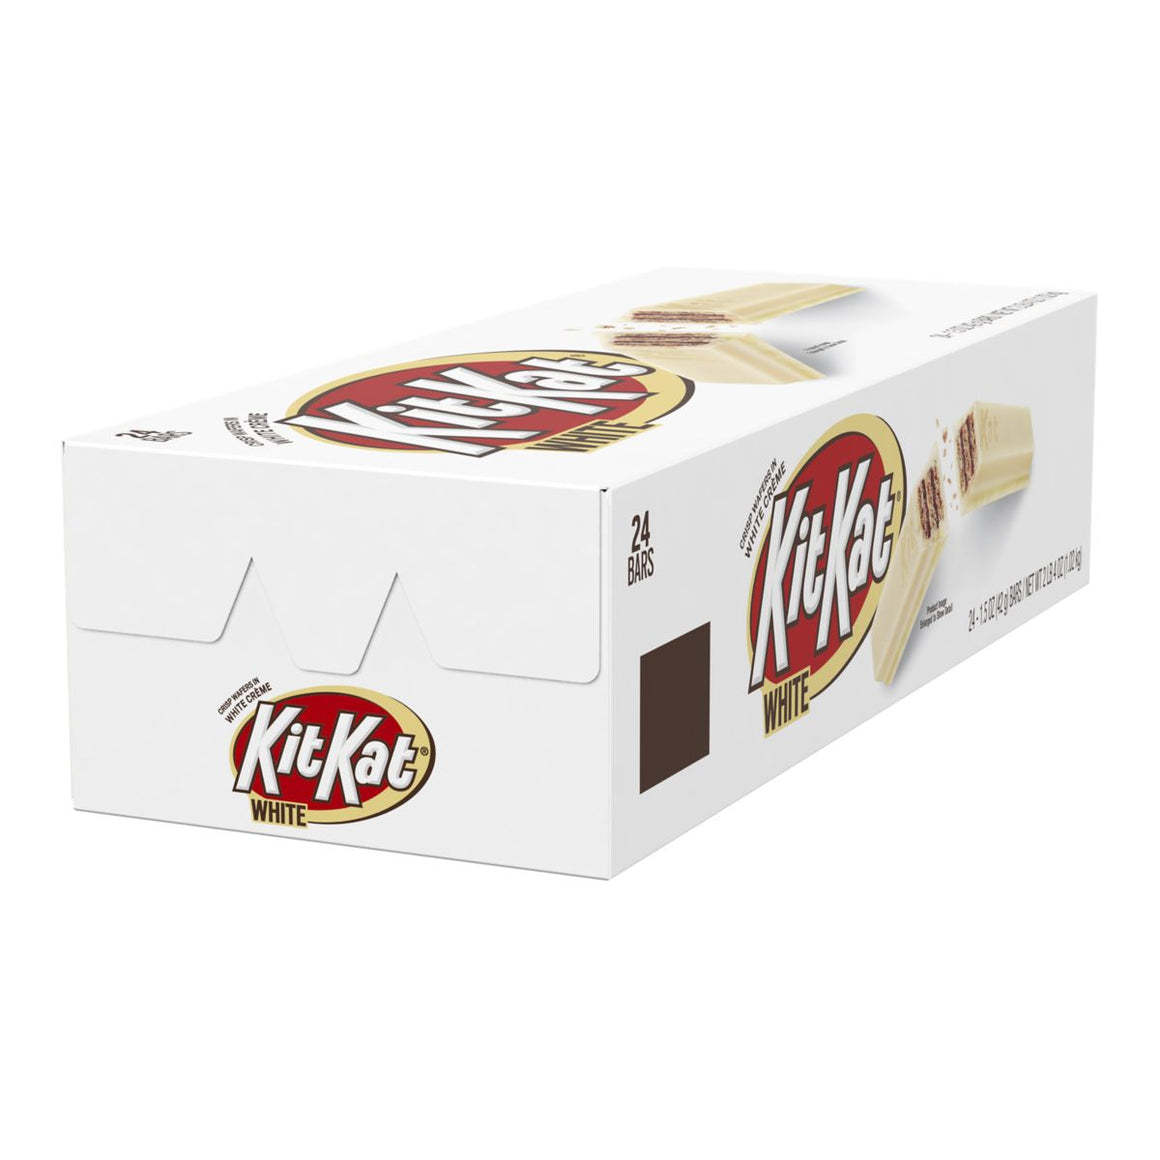 All City Candy Kit Kat White Candy Bar 1.5 oz. 1 Bar Candy Bars Hershey's For fresh candy and great service, visit www.allcitycandy.com